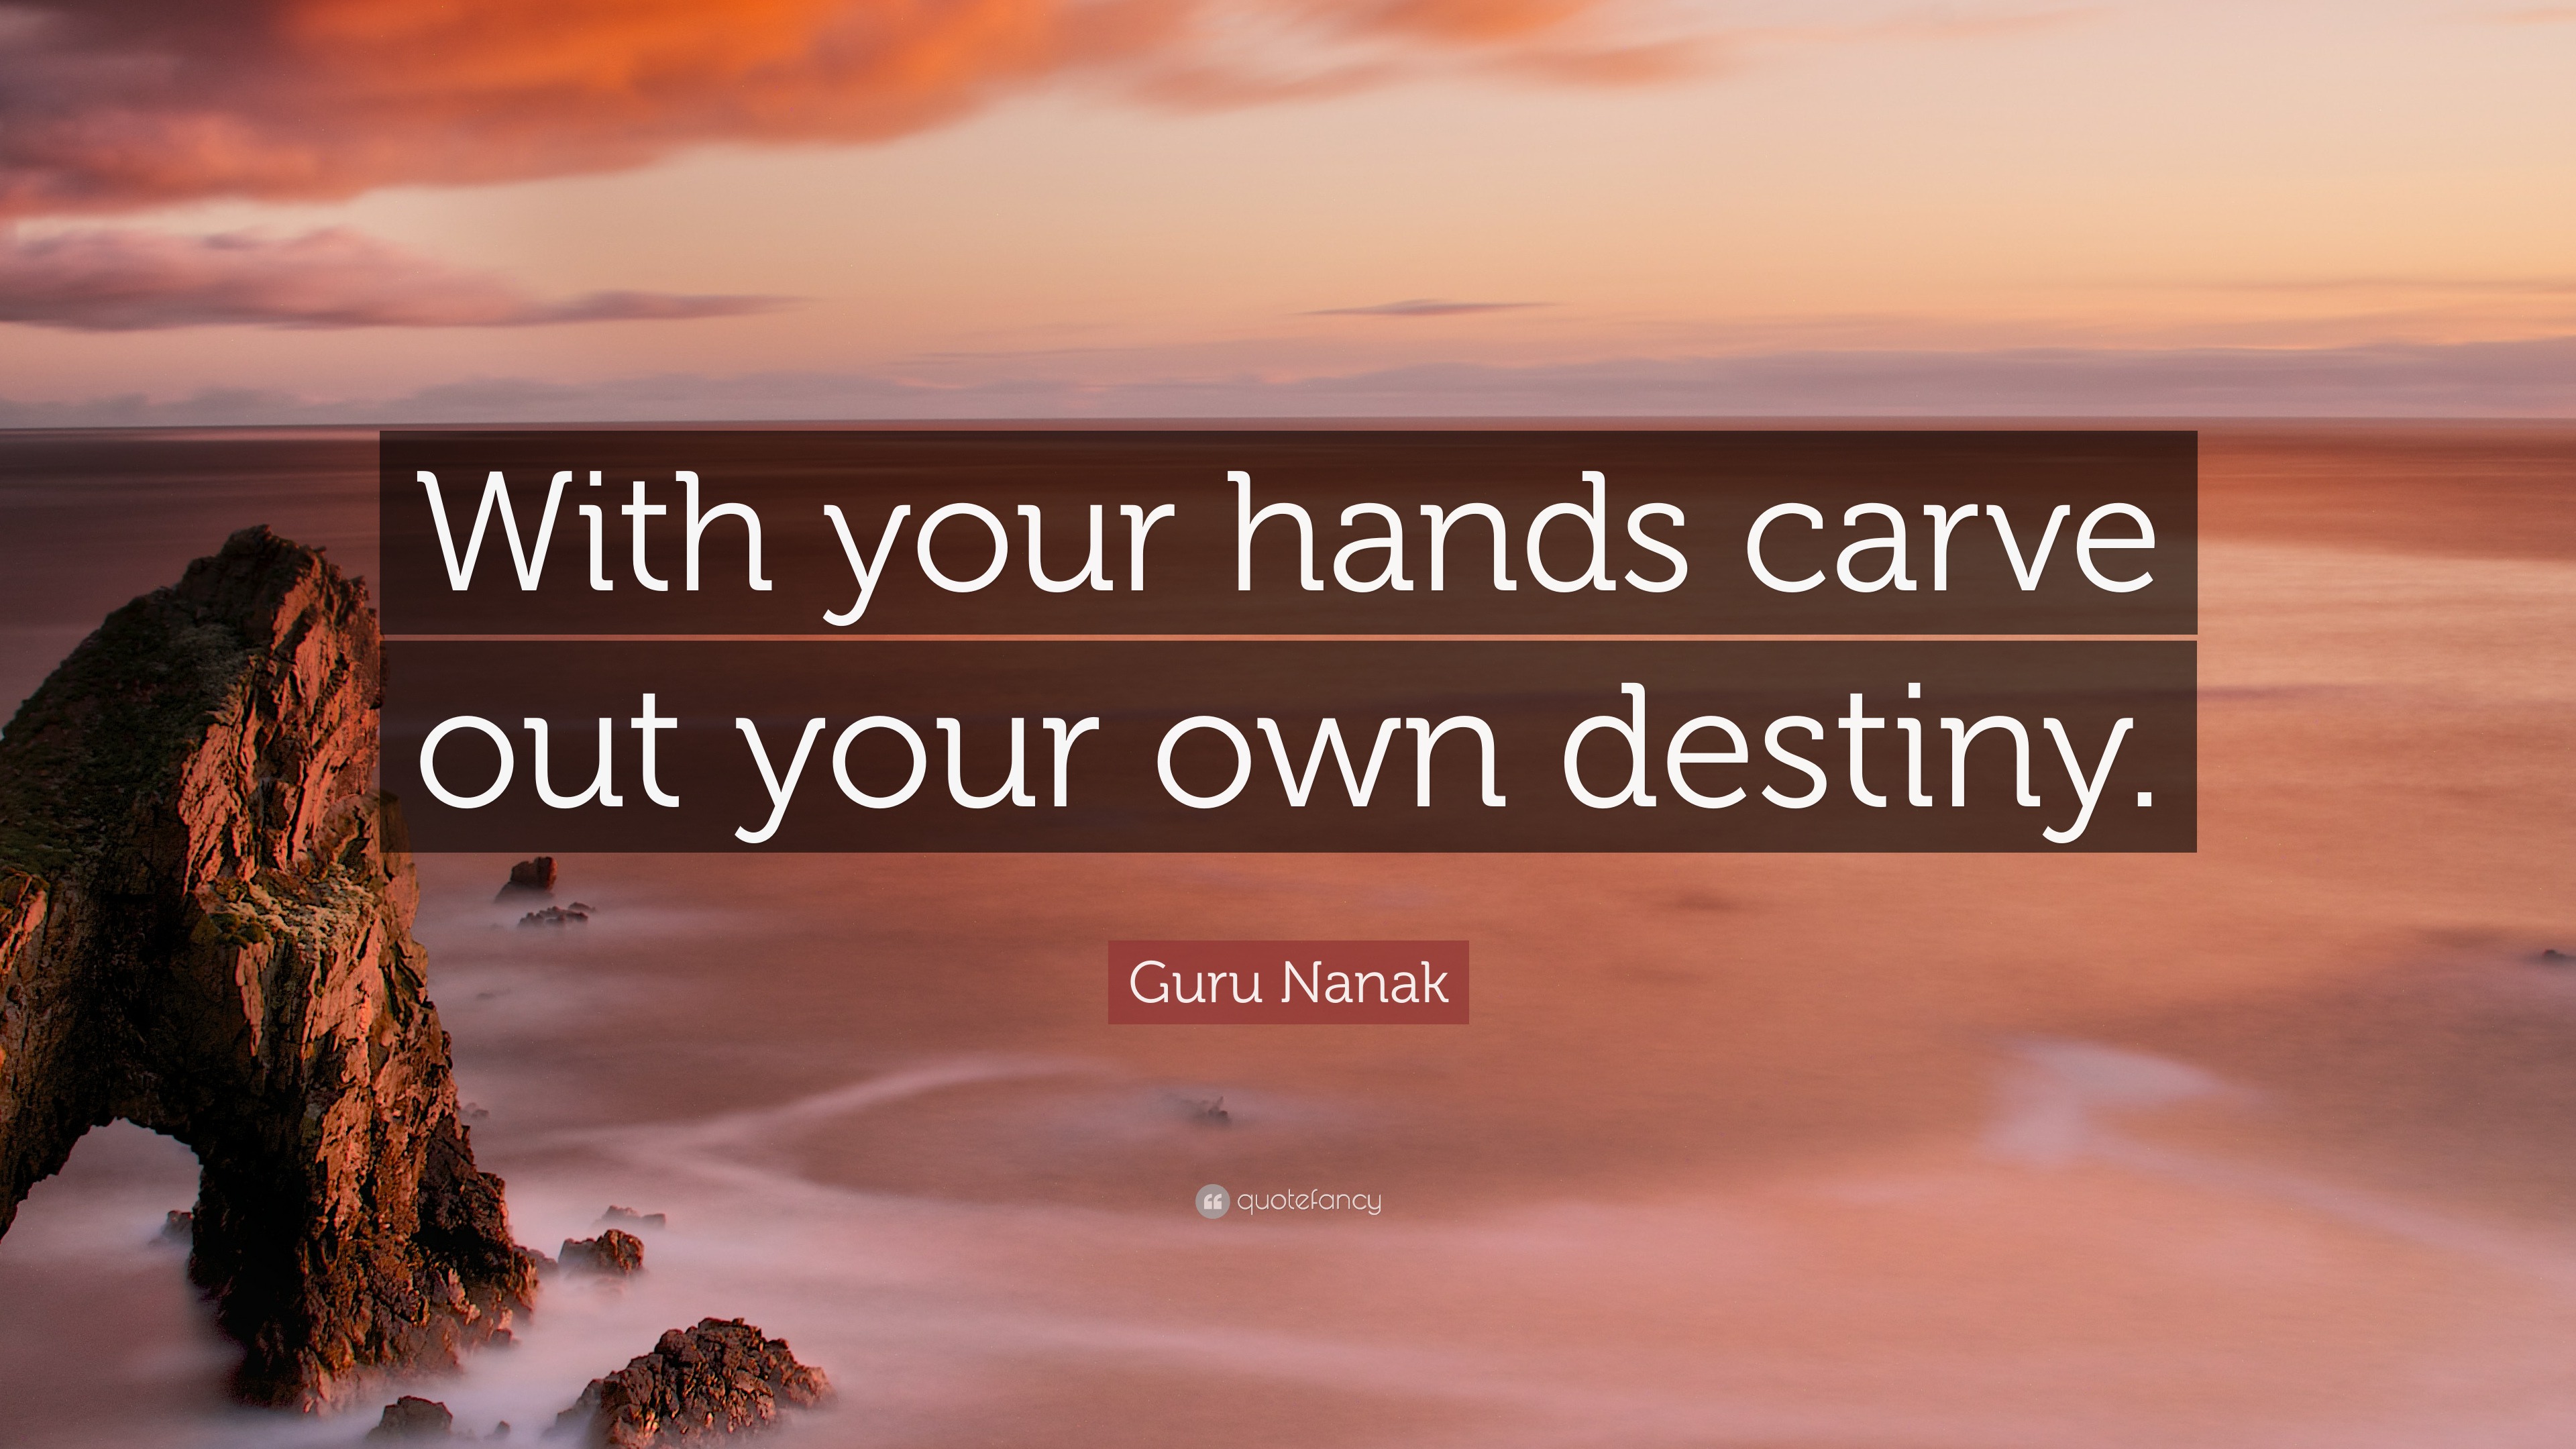 Guru Nanak Quote: “With your hands carve out your own destiny.”